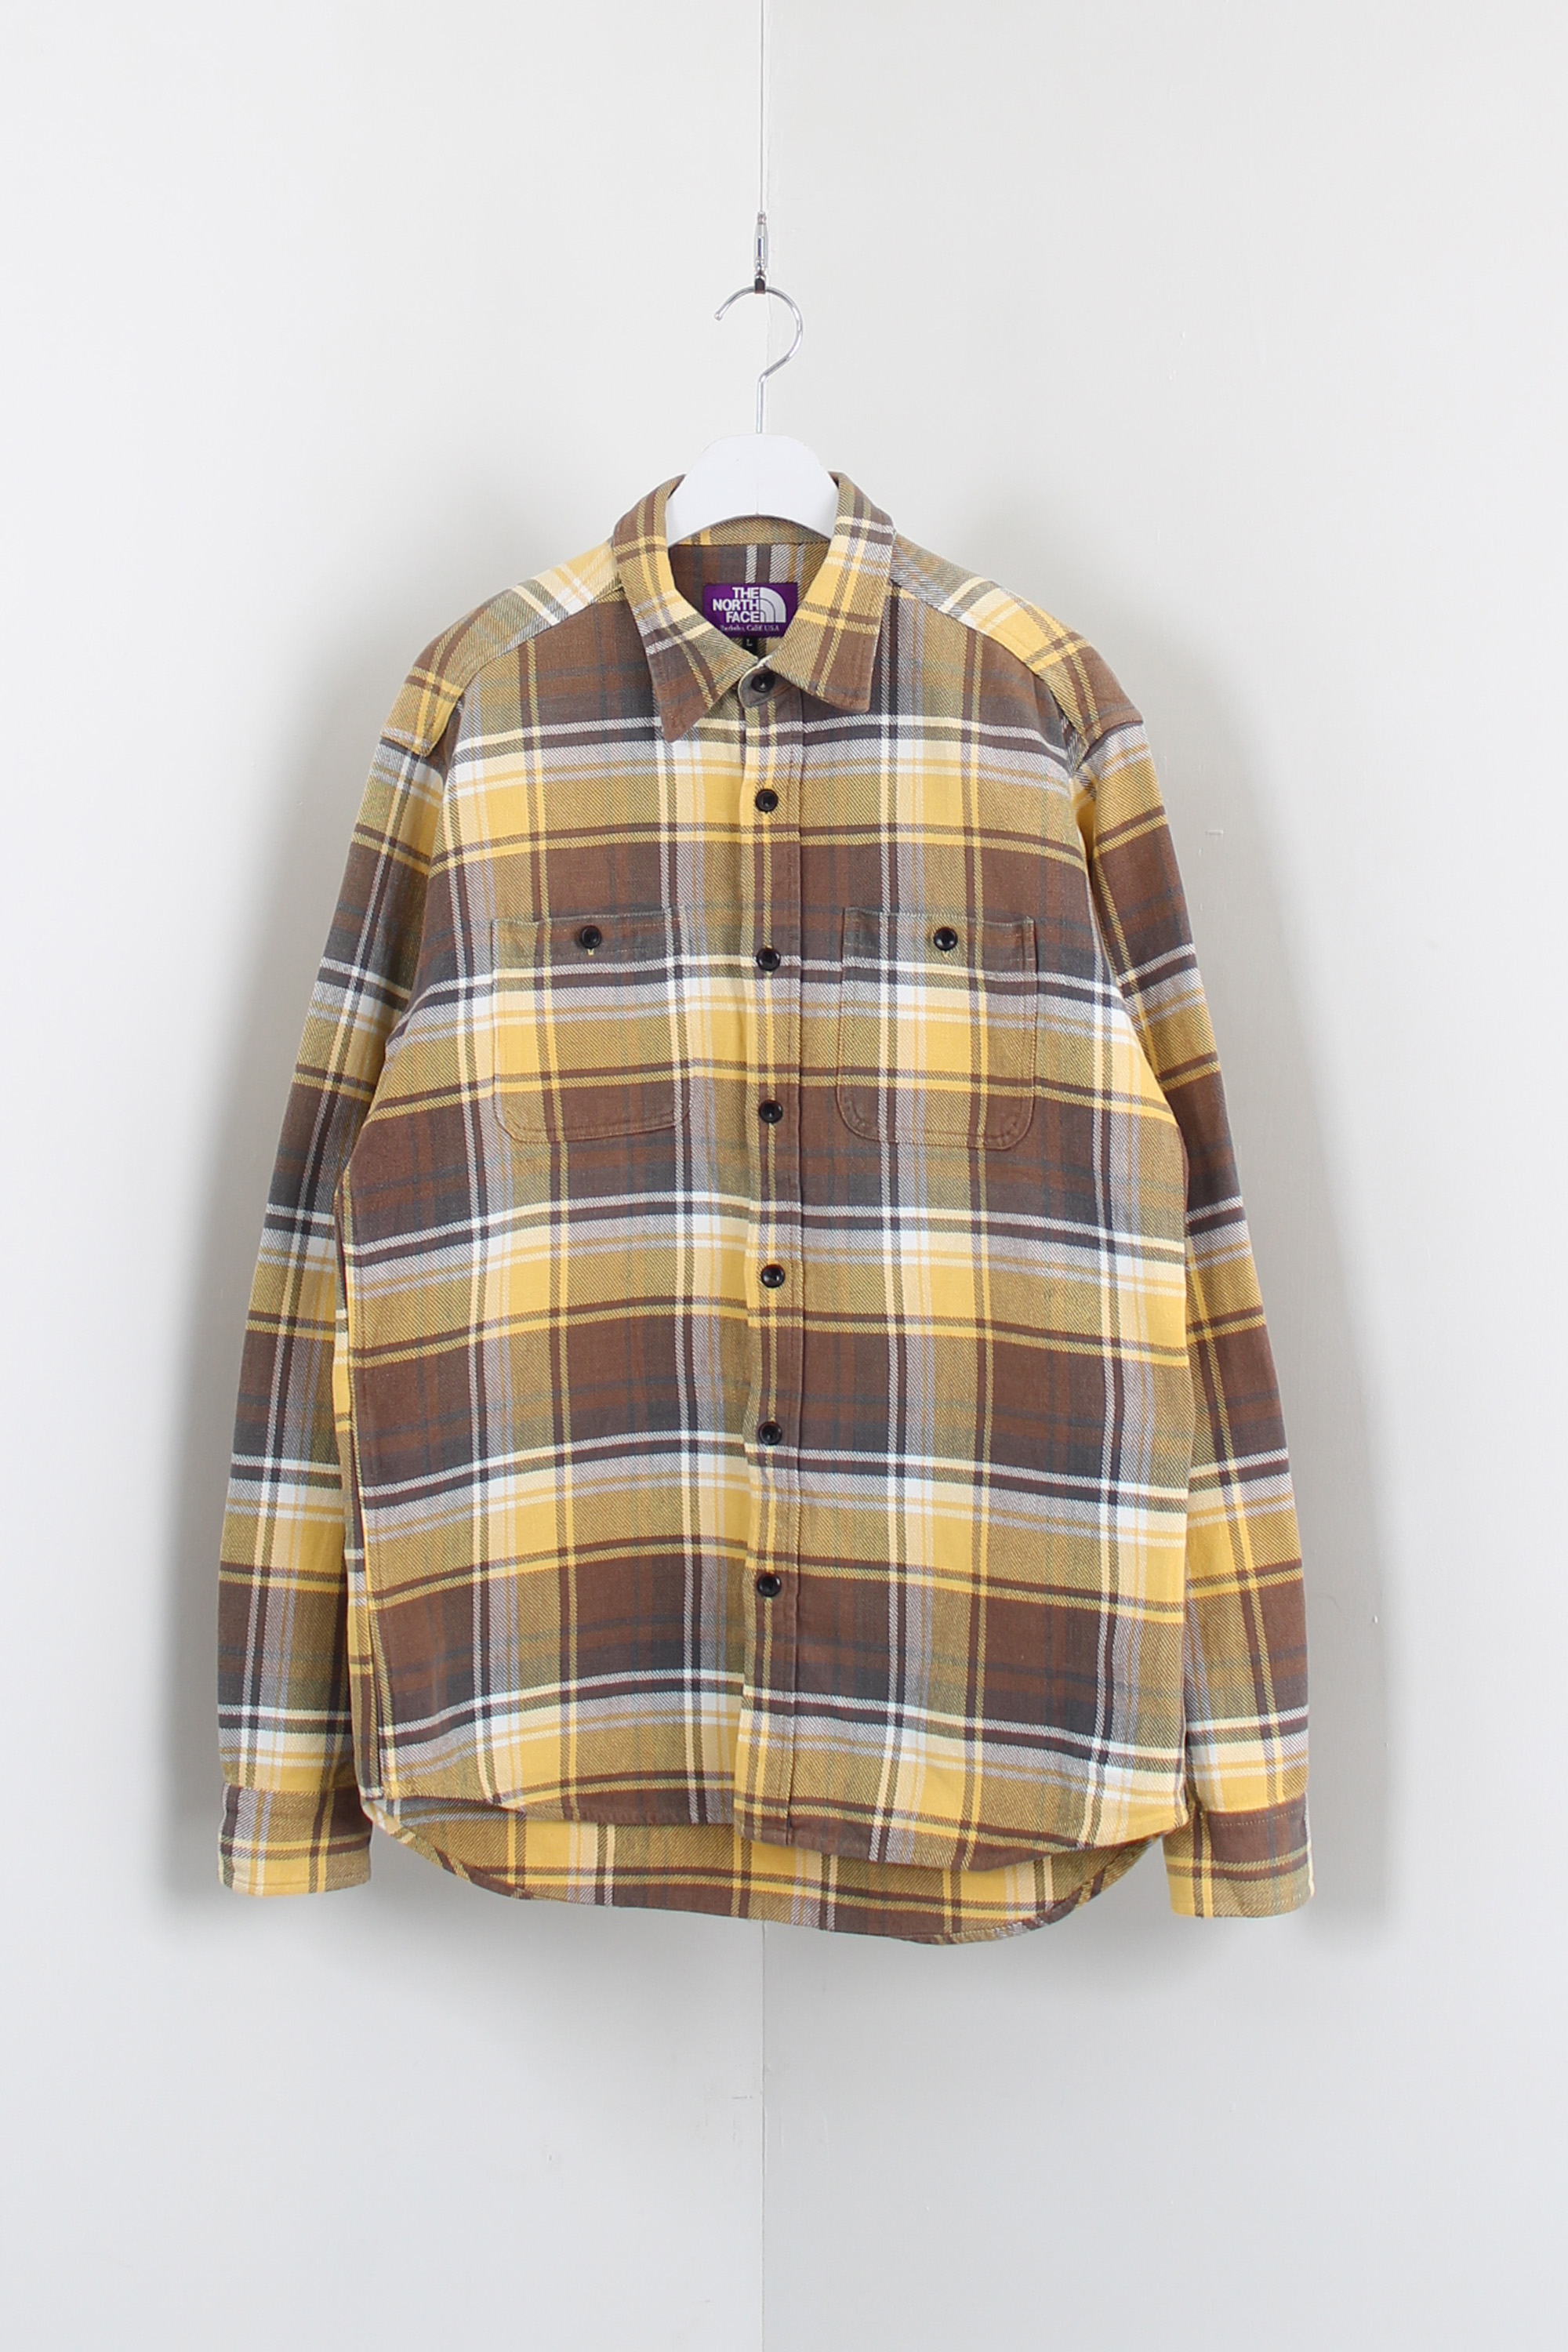 THE NORTH FACE PURPLE LABEL shirt